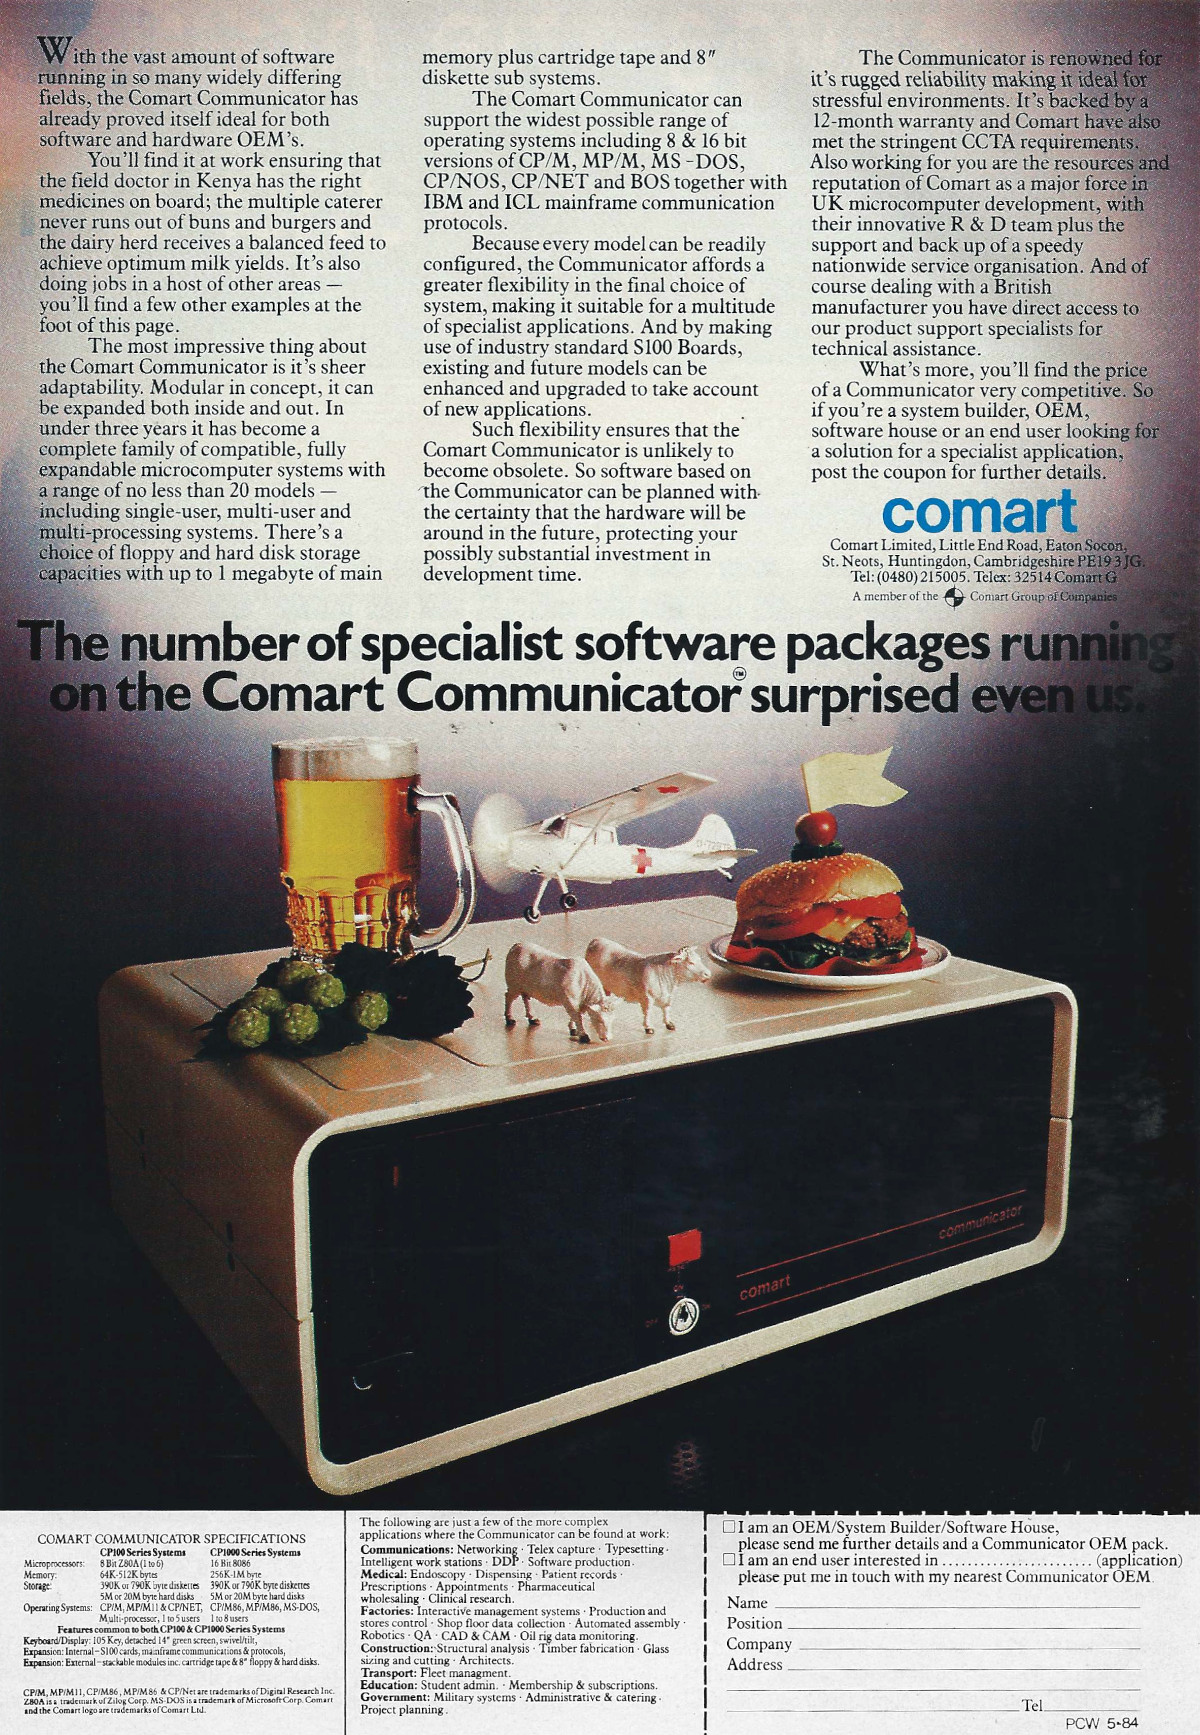 Comart's Communicator was still available in this advert from 1984, upping the ante in the 